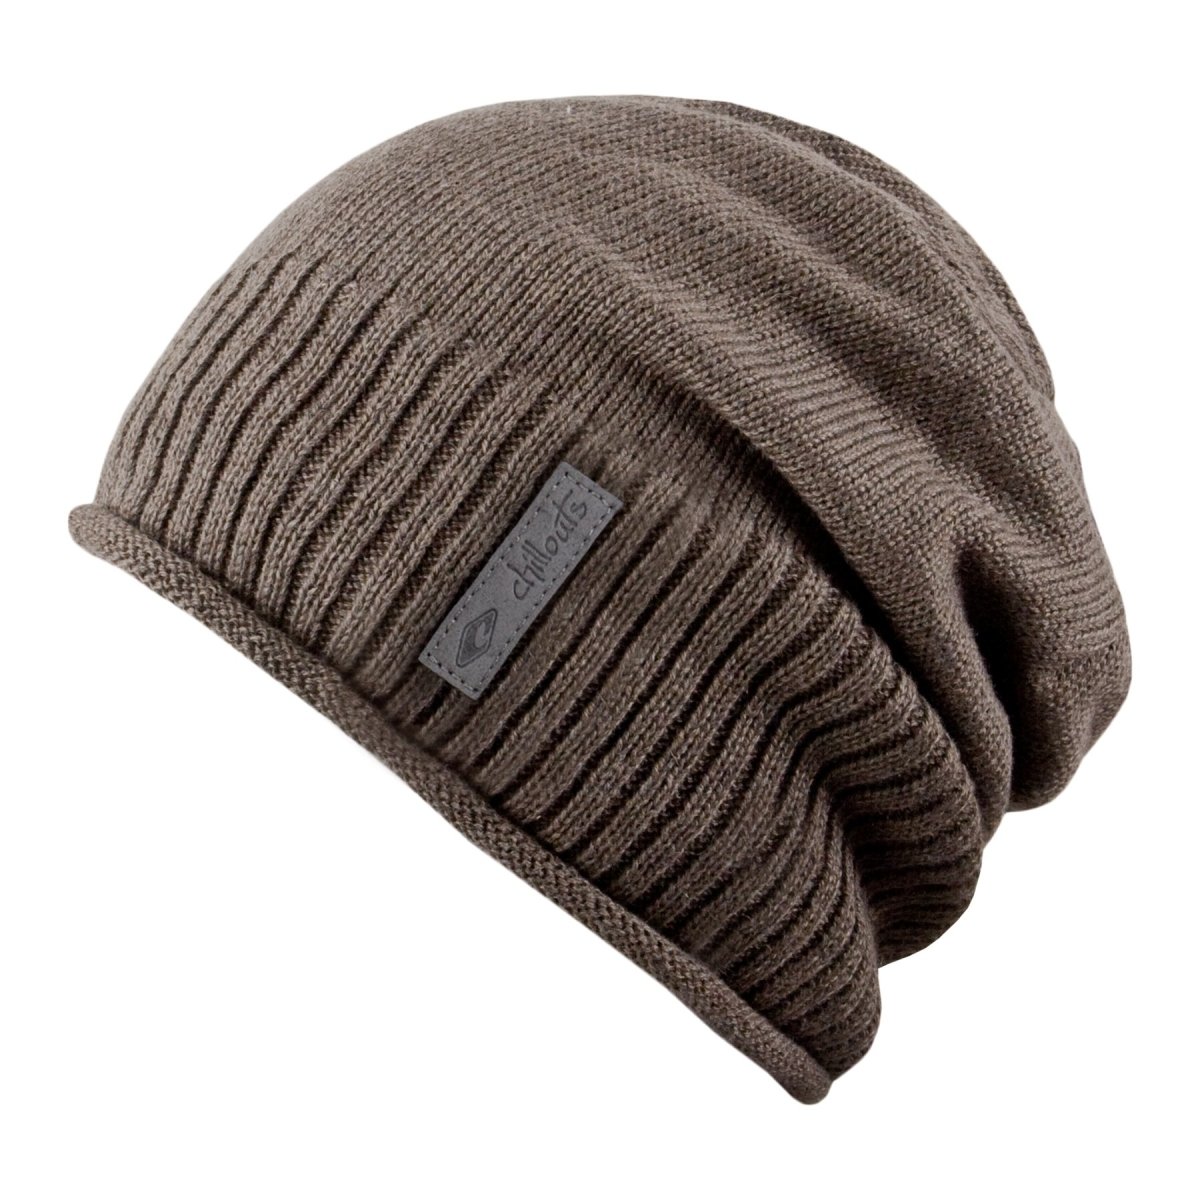 EXTRA WARM – Headwear Chillouts